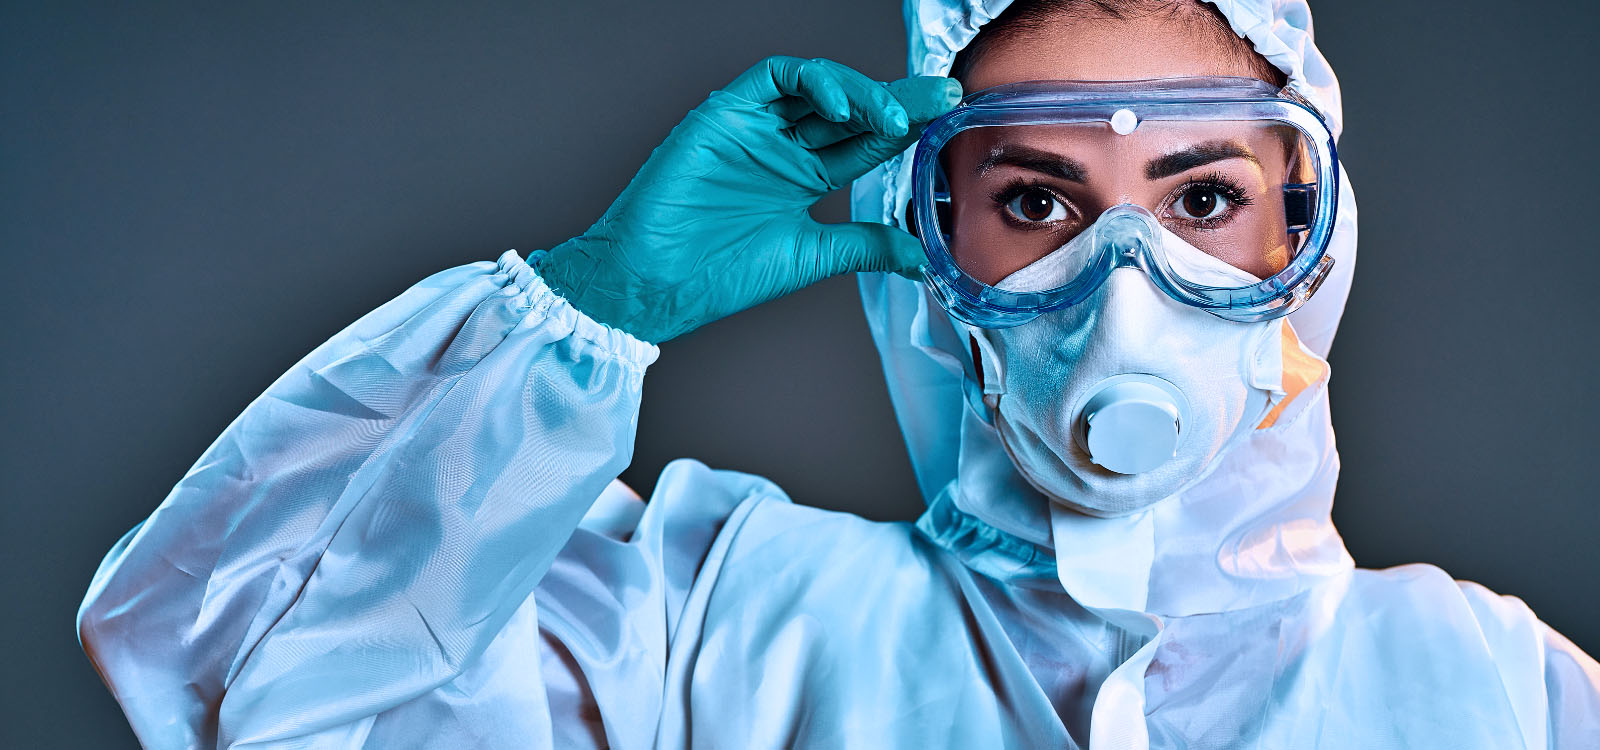 Laboratory Safety Practices: Essential Tips for a Secure Working Environment